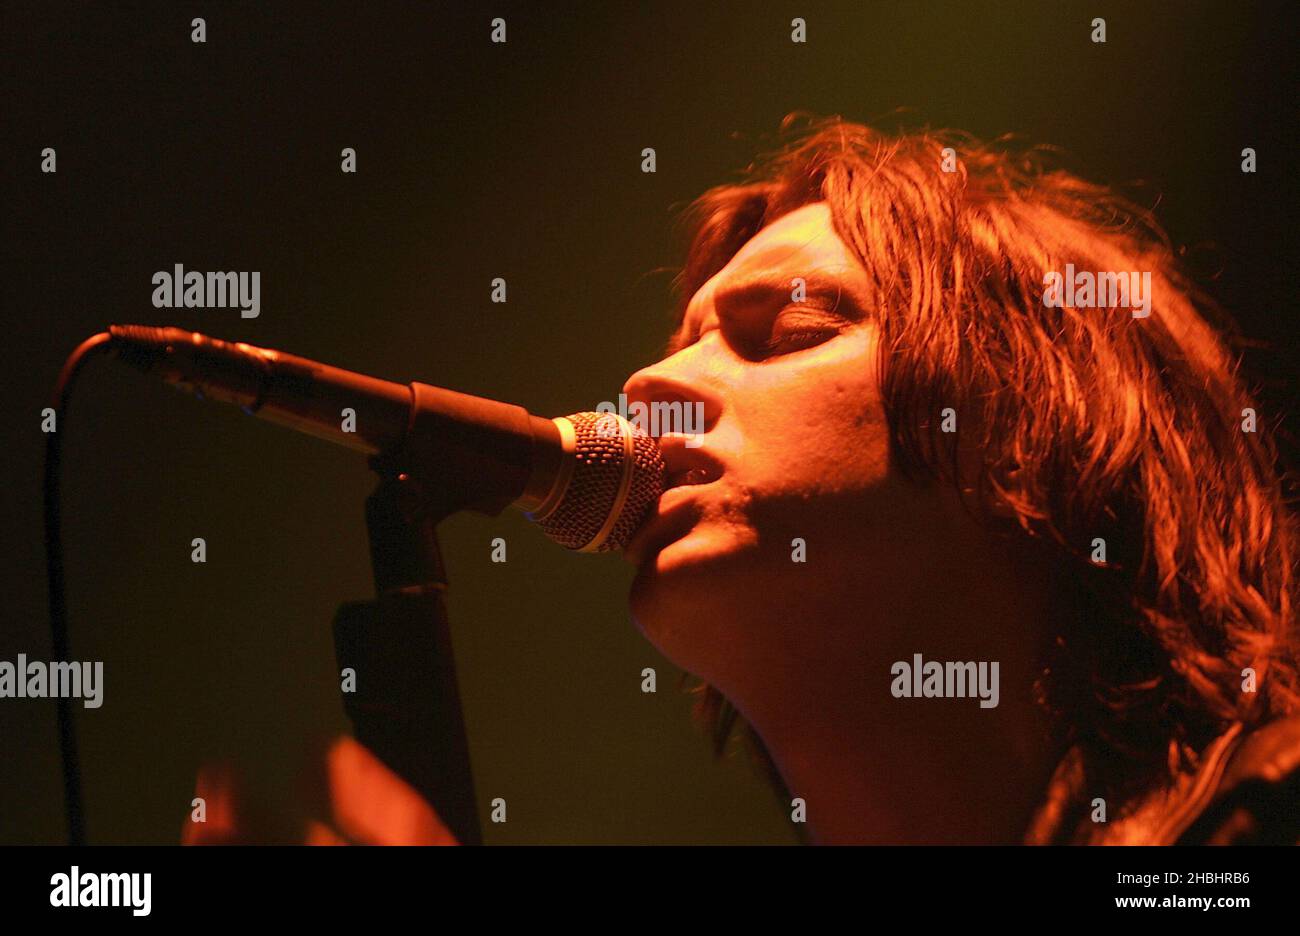 Julian Casablancas of New York indie group The Strokes play their first London date of the UK tour promoting their third album 'First Impressions Of Earth', released January 9, at Shepherds Bush Empire in London. Stock Photo